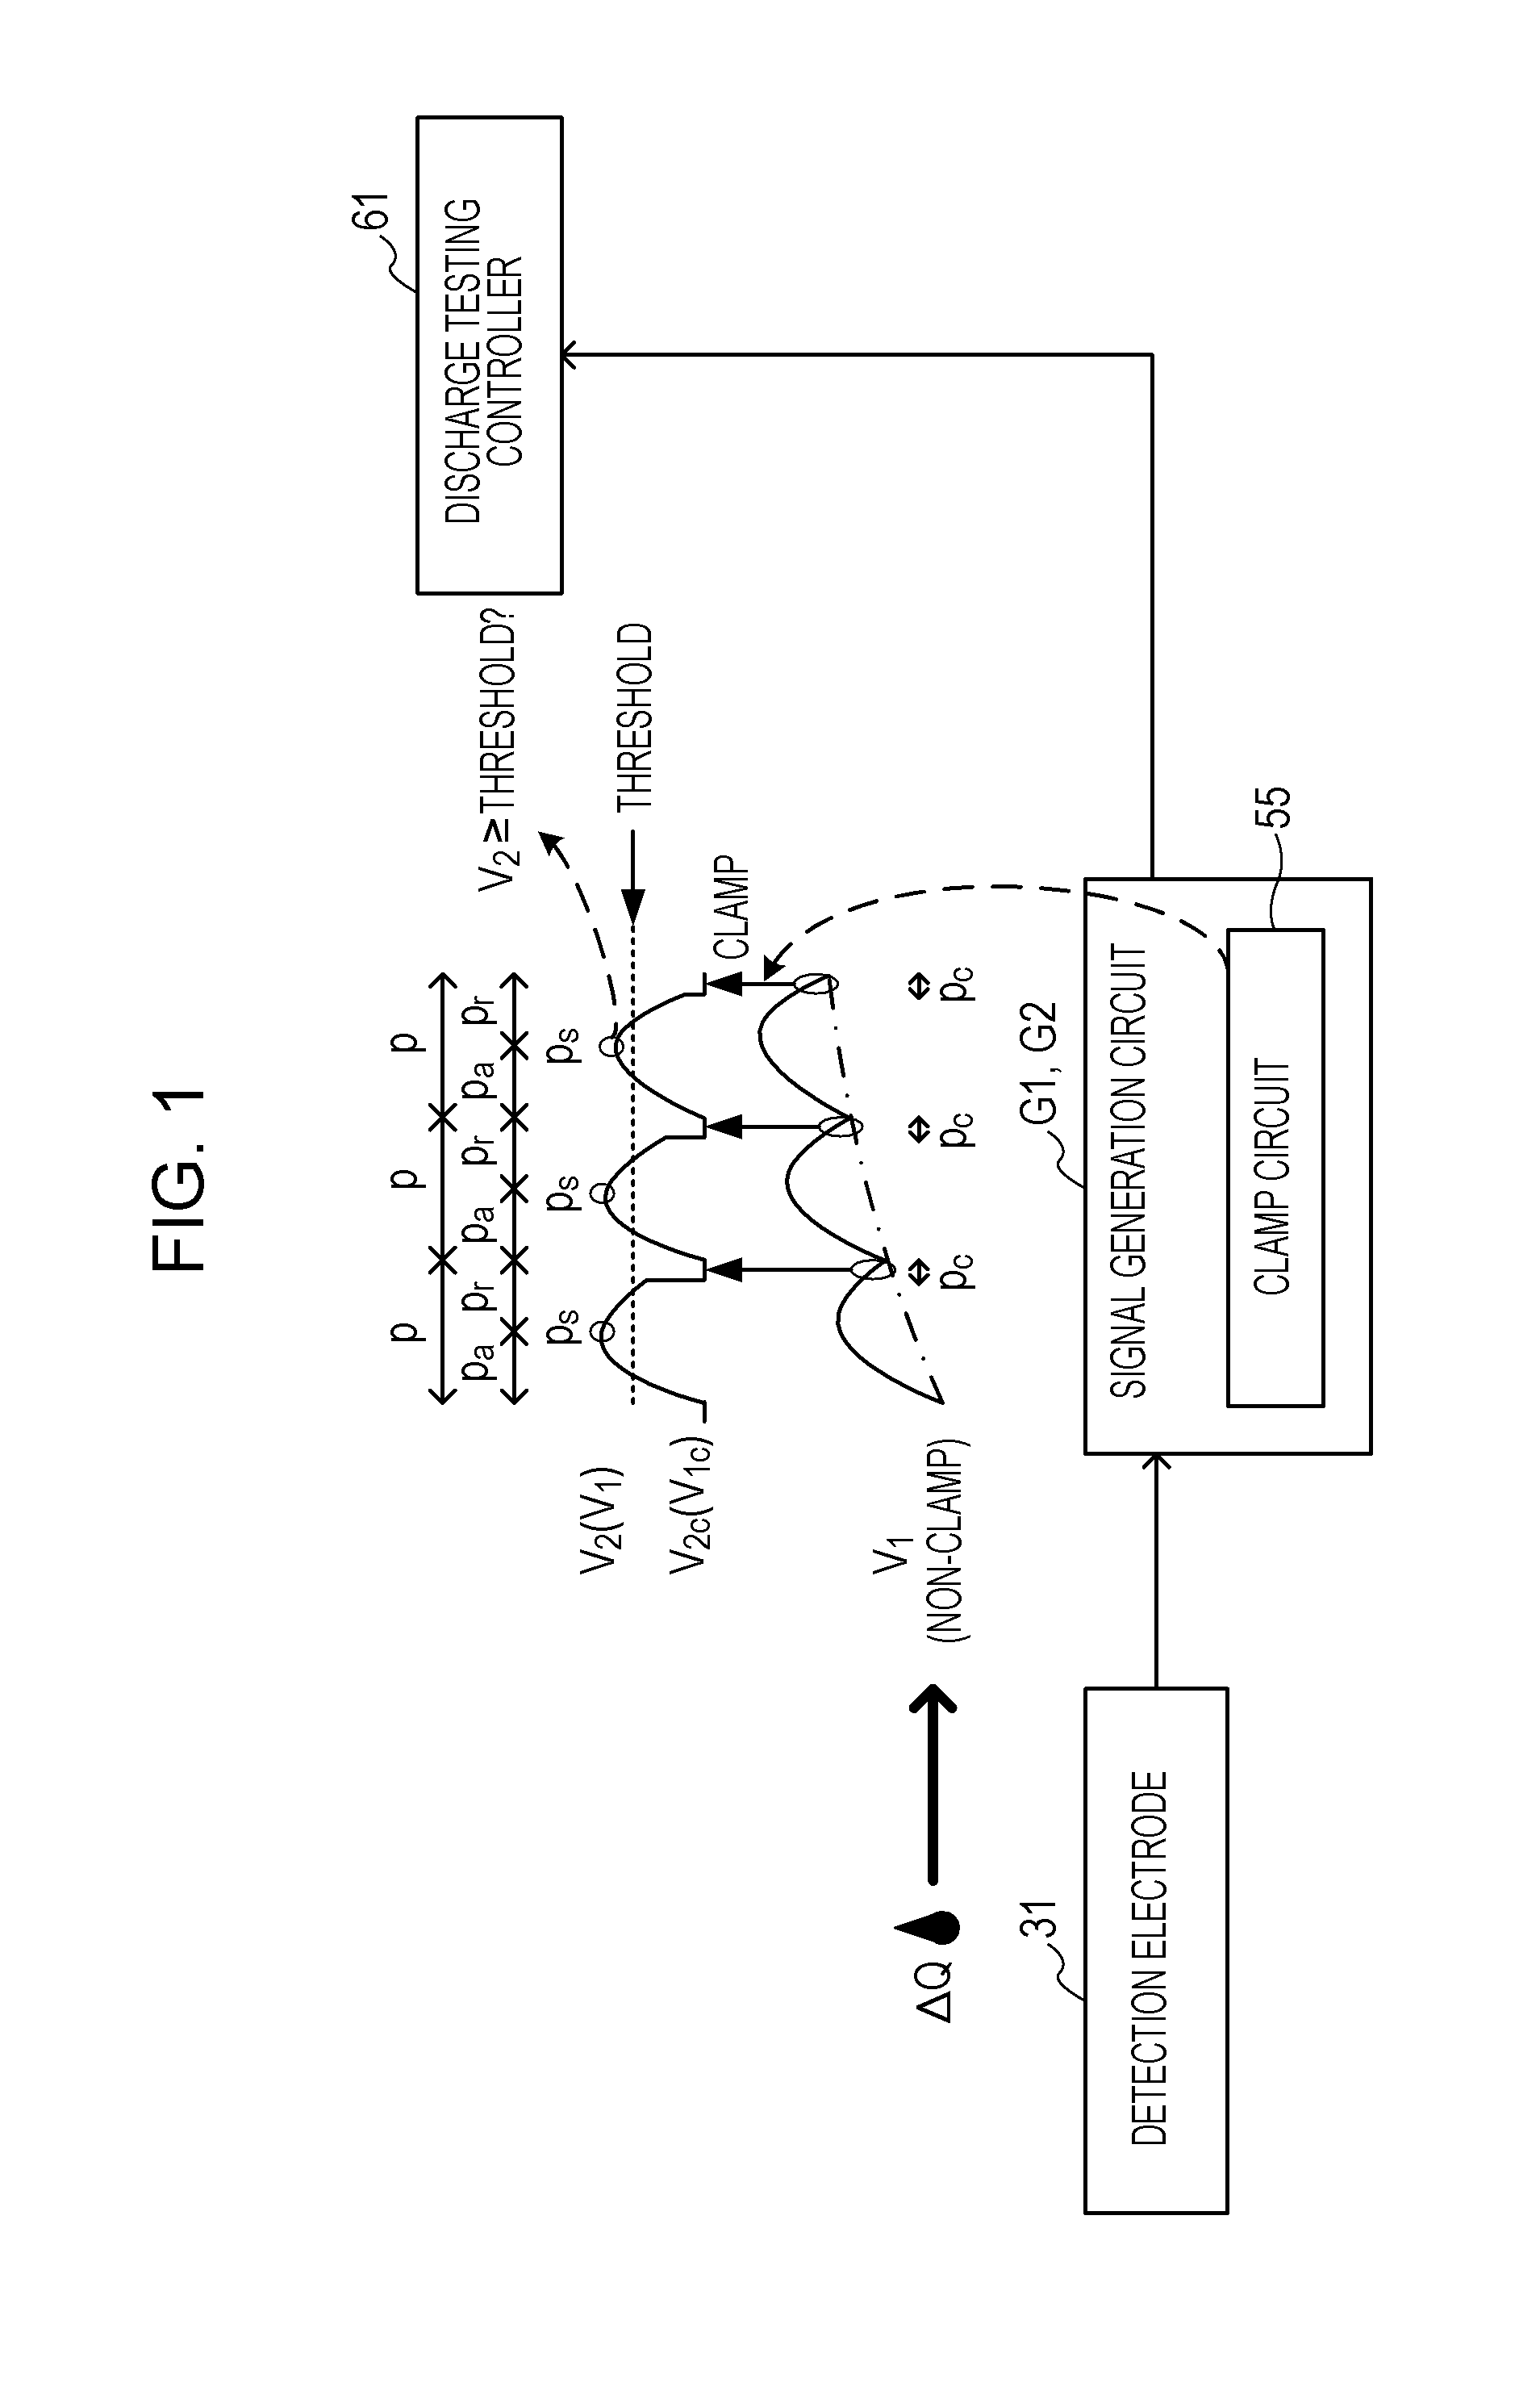 Discharge testing device